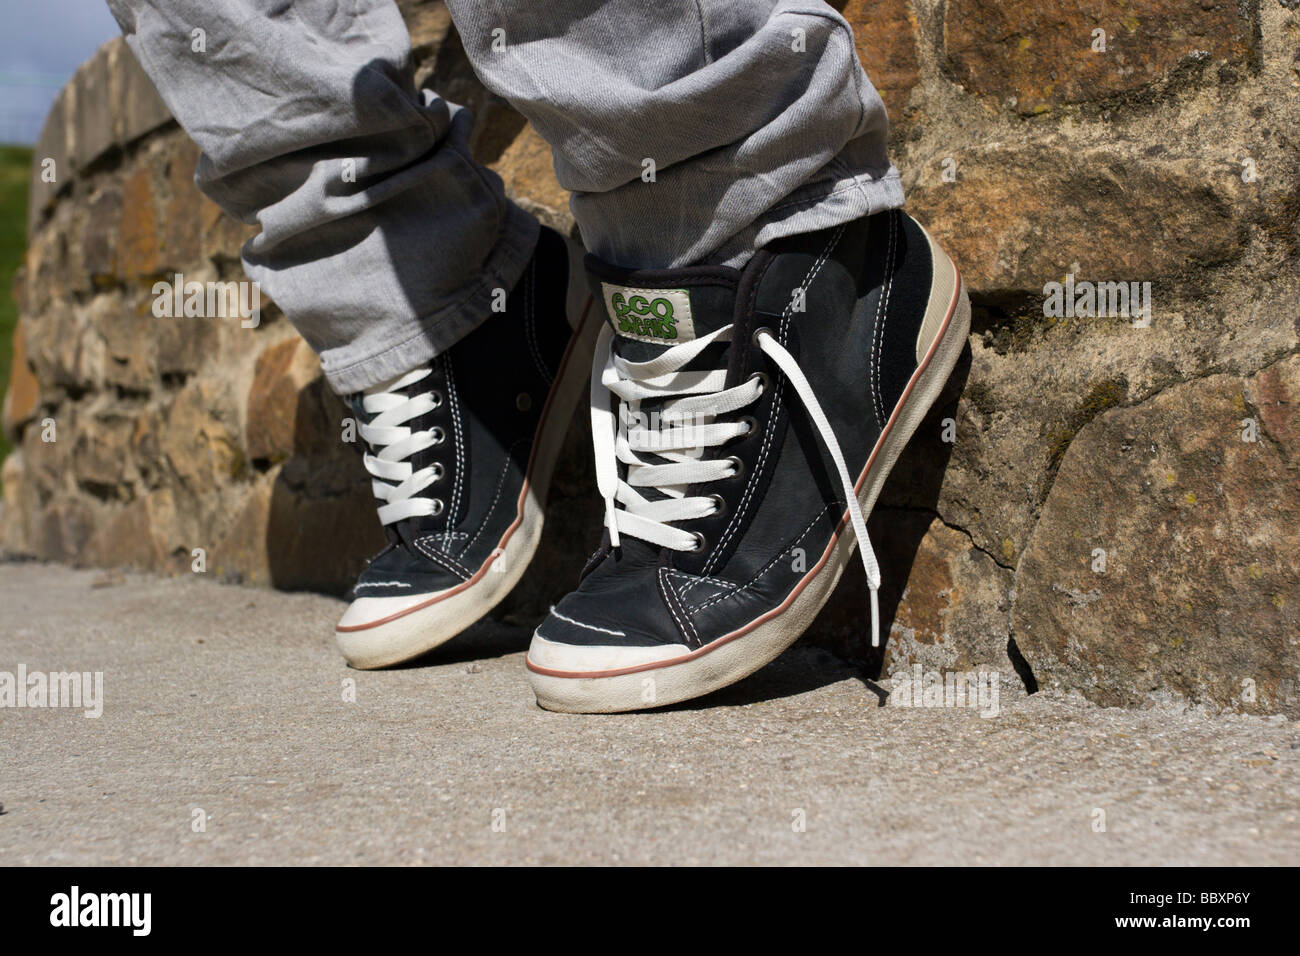 Youth Sitting on Wall Wearing Pumps Stock Photo